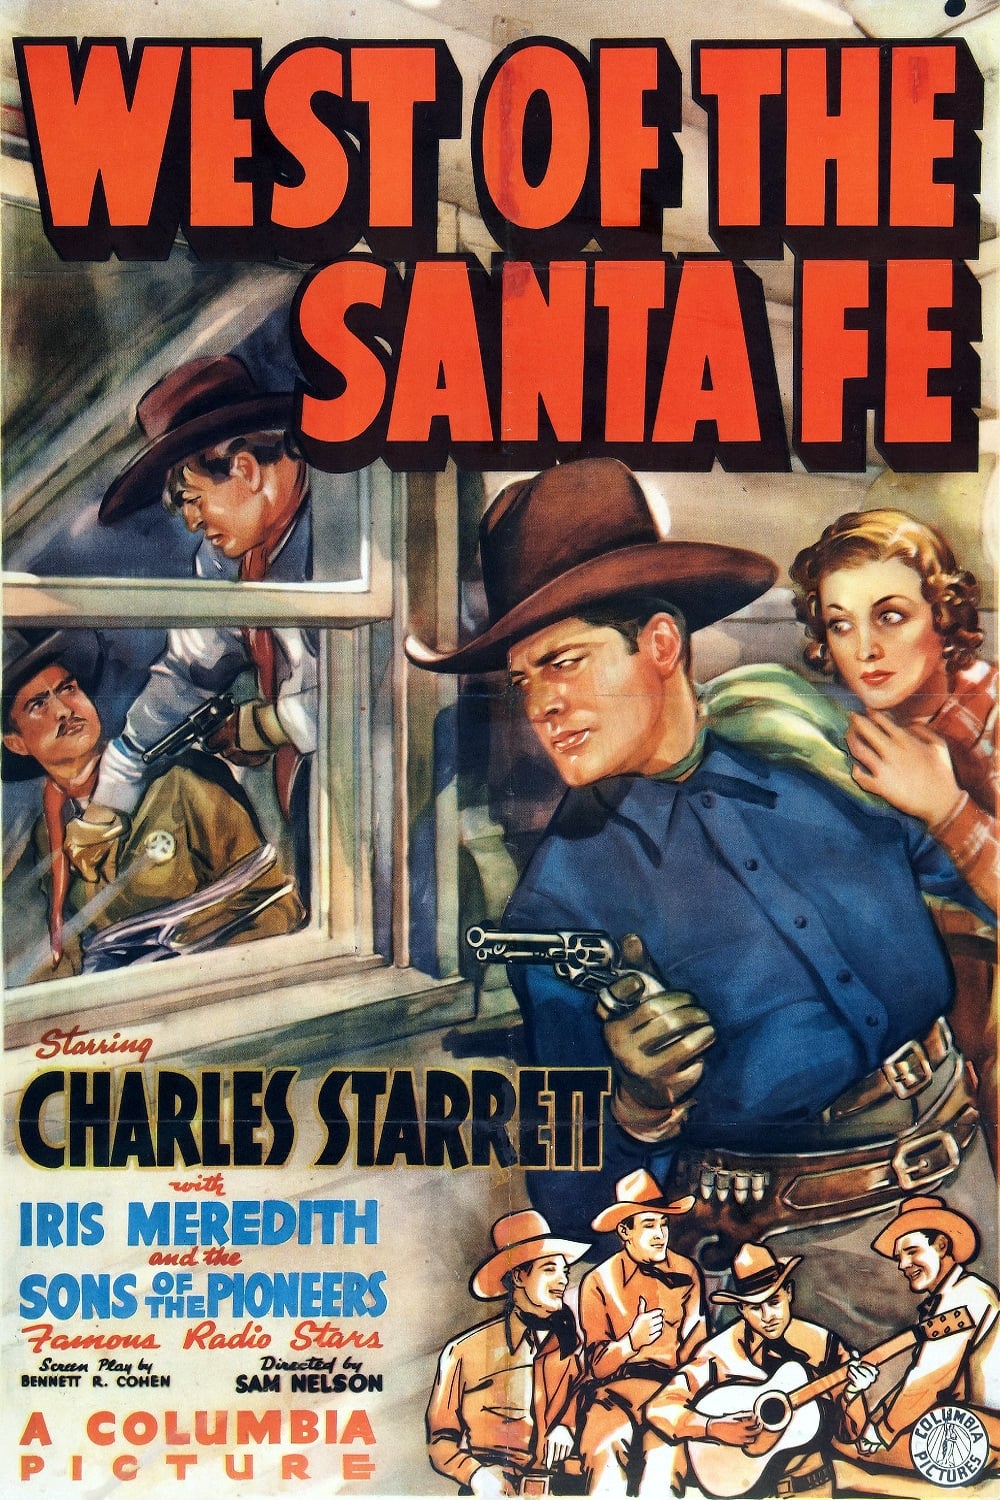 West of the Santa Fe (1938)